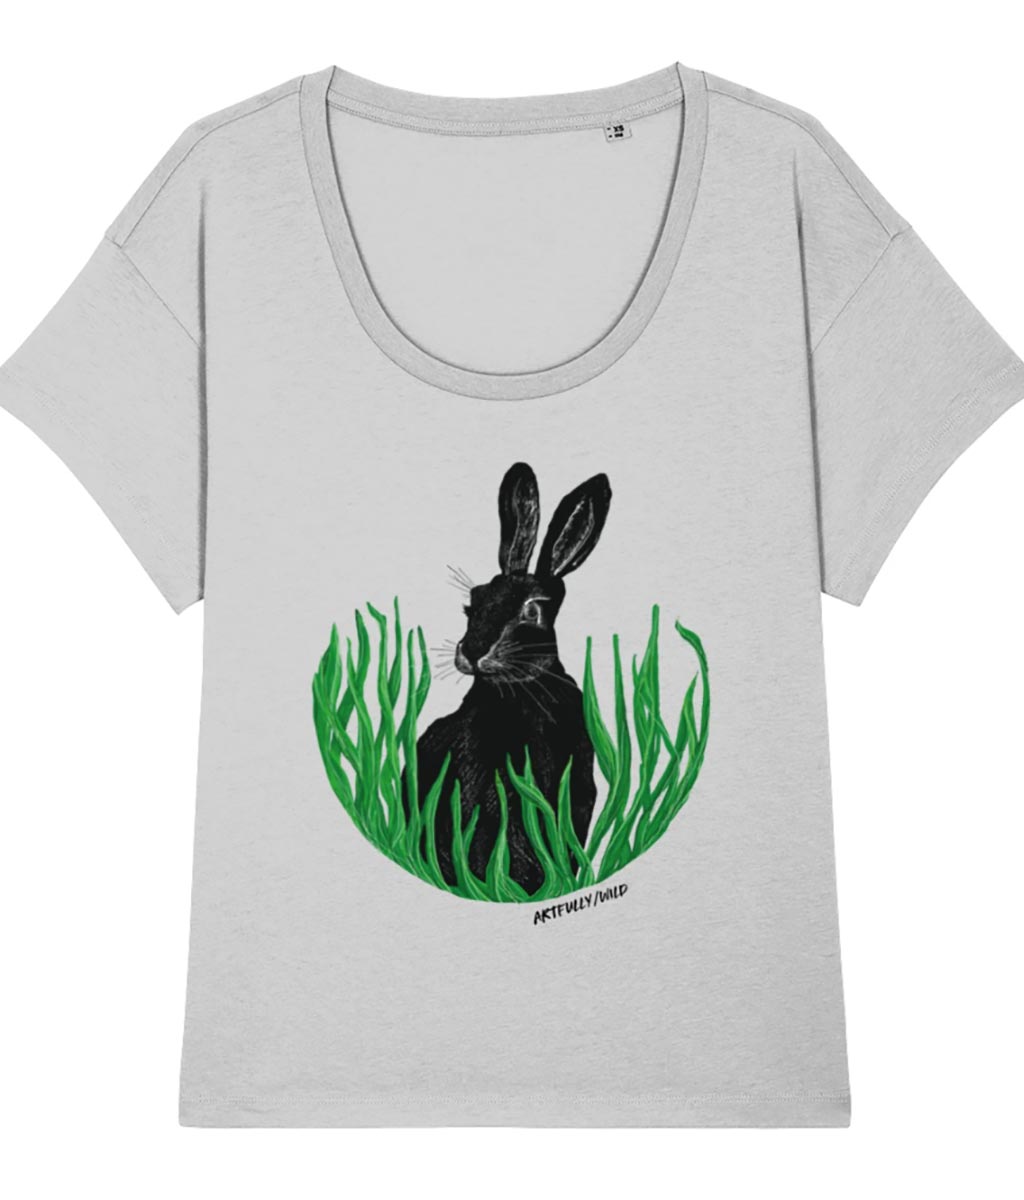 ‘HARE IN THE GRASS’ Print on Women’s Grey Marl Scoop Neck Chiller T-Shirt. Original Illustration by Artfully/Wild. Printed with water-based inks in the UK for wildlife lovers.